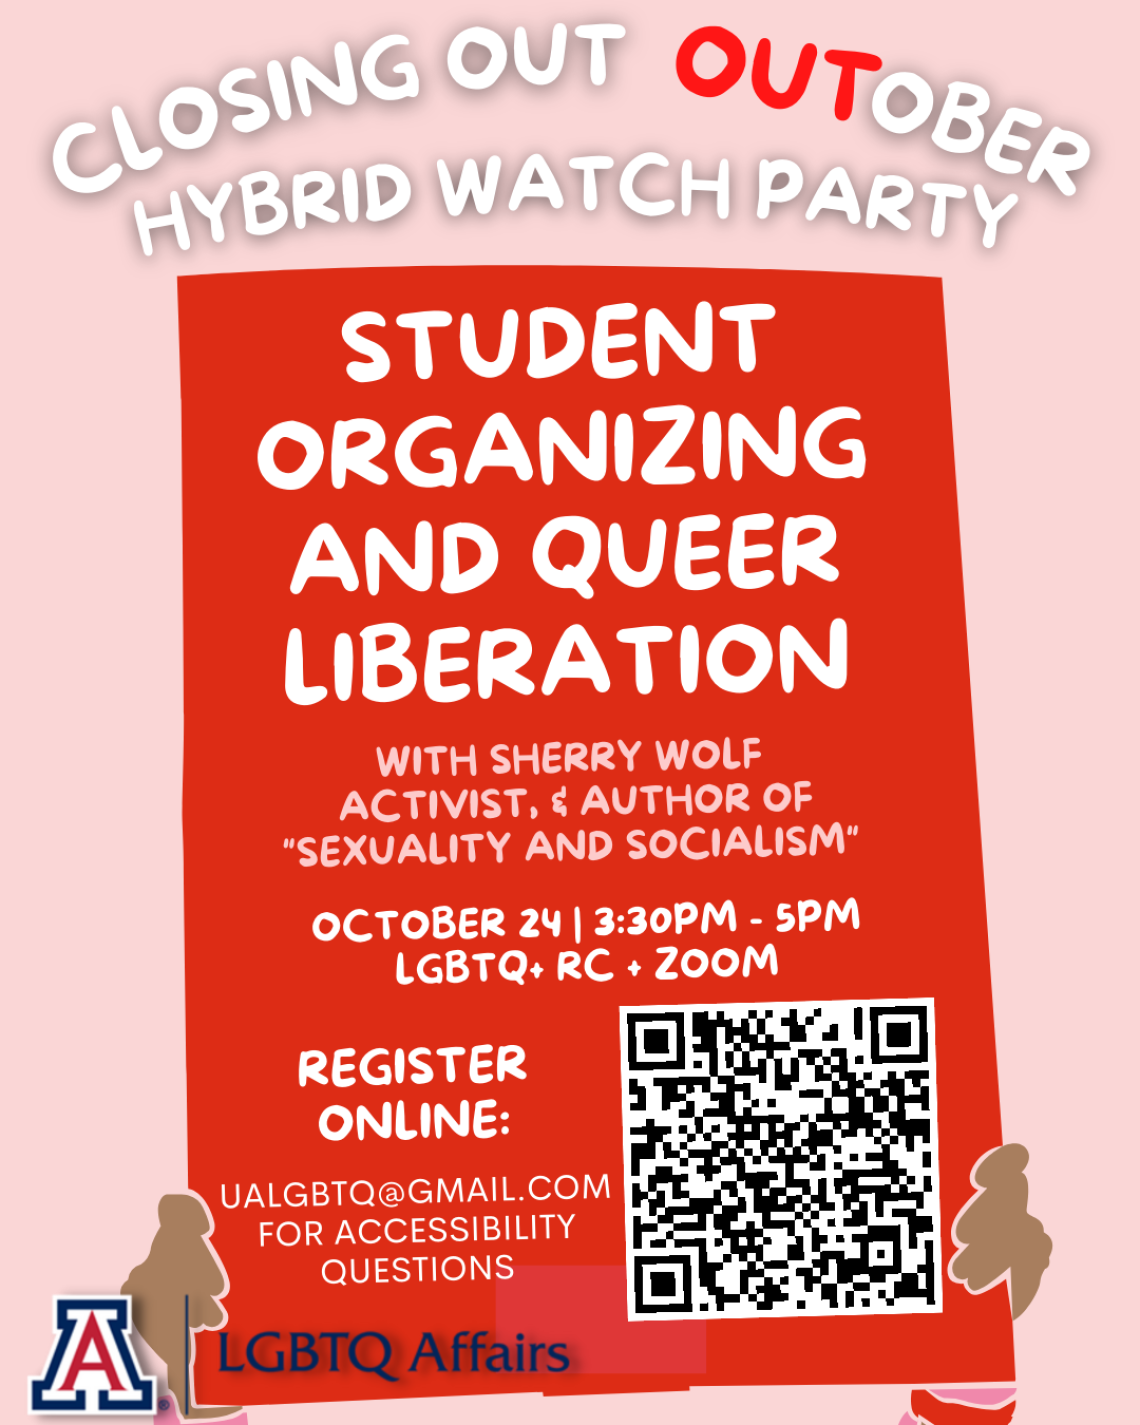 Pink flier with two hands holding red sign. Text above sign reads: "Closing Out OUTober Hybrid Watch Party". Text on sign reads: "Student Organizing and Queer Liberation with Sherry Wolf, Activist & Author of 'Sexuality and Socialism'." Monday, October 24, 3:30-5 PM. LGBTQ+RC + Zoom. Register Online: https://arizona.zoom.us/meeting/register/tZElc-6urDgqGdaB36pO4HTGkEZzHWIV4Yv4. UALGBTQ@gmail.com for Accessibility Questions.